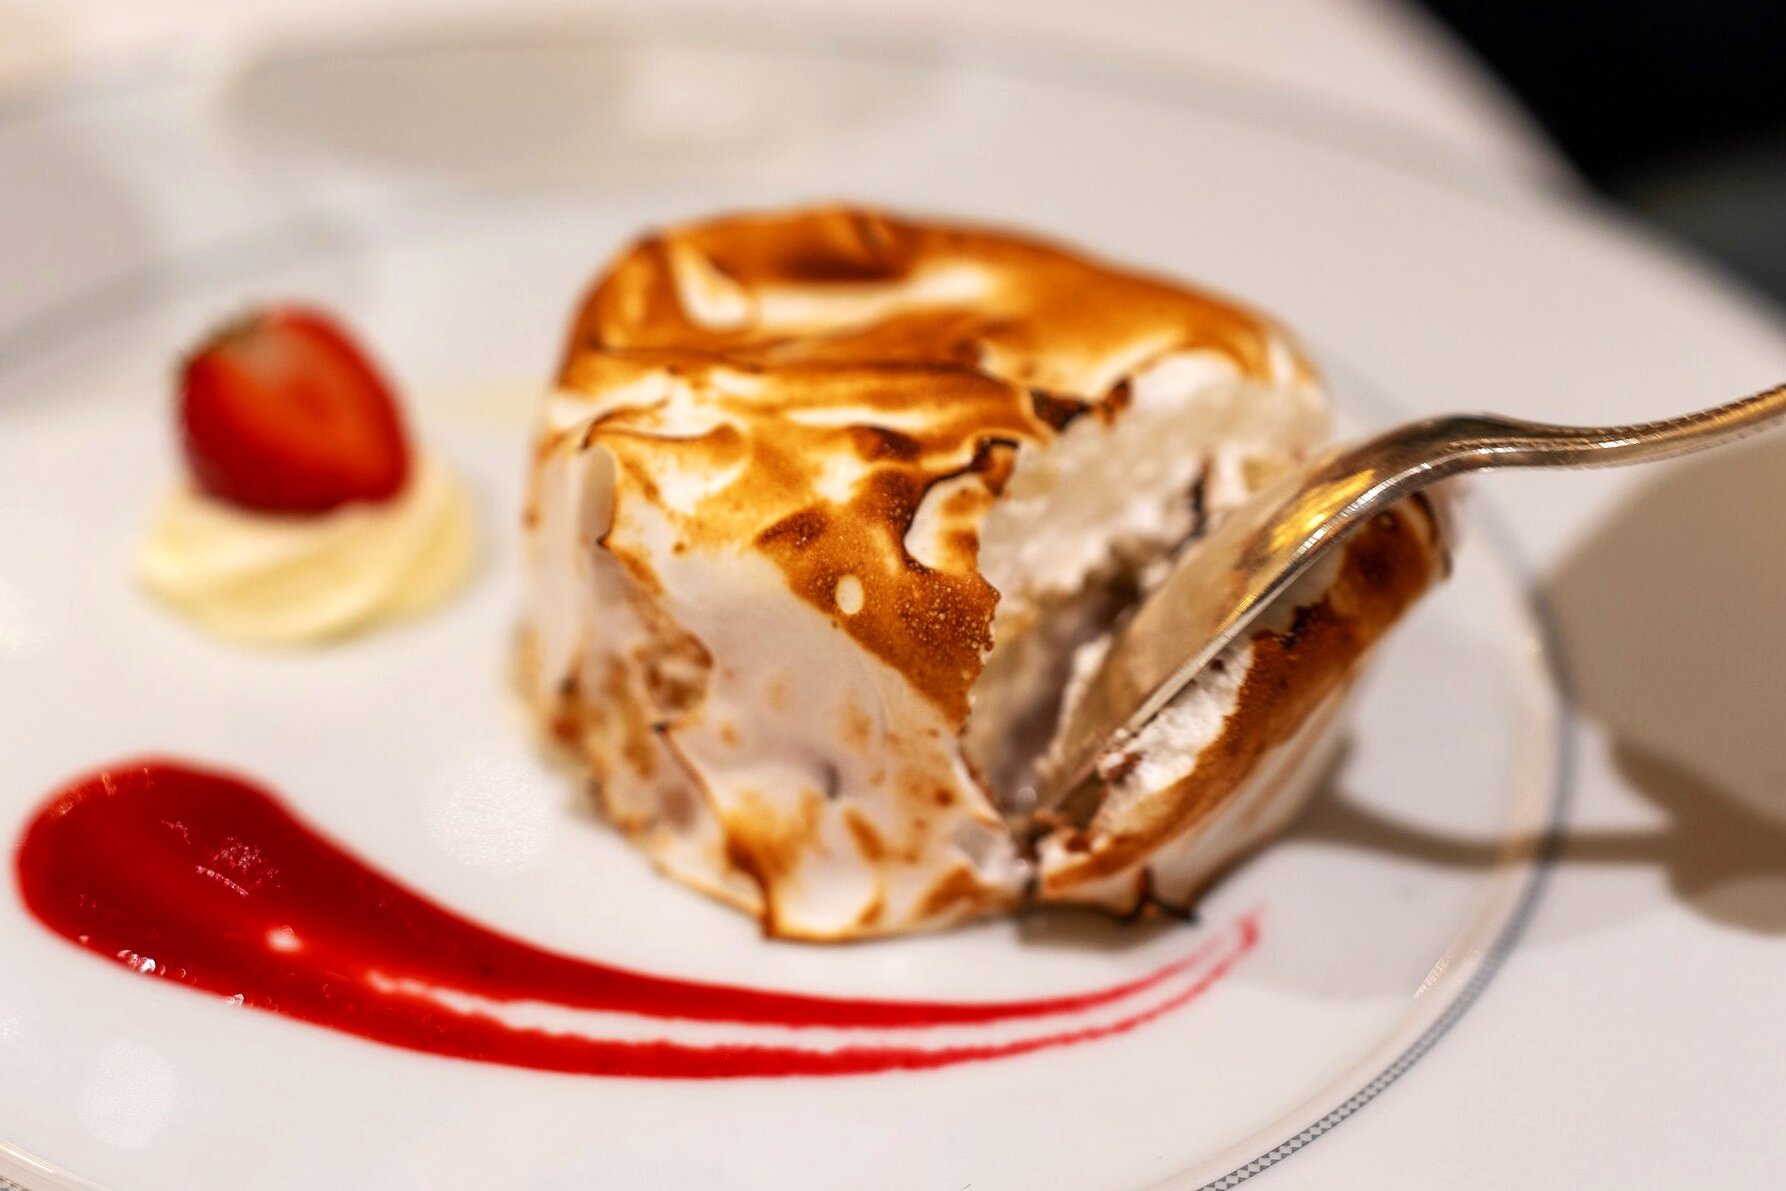  What better way to finish than a delicious baked Alaska? 